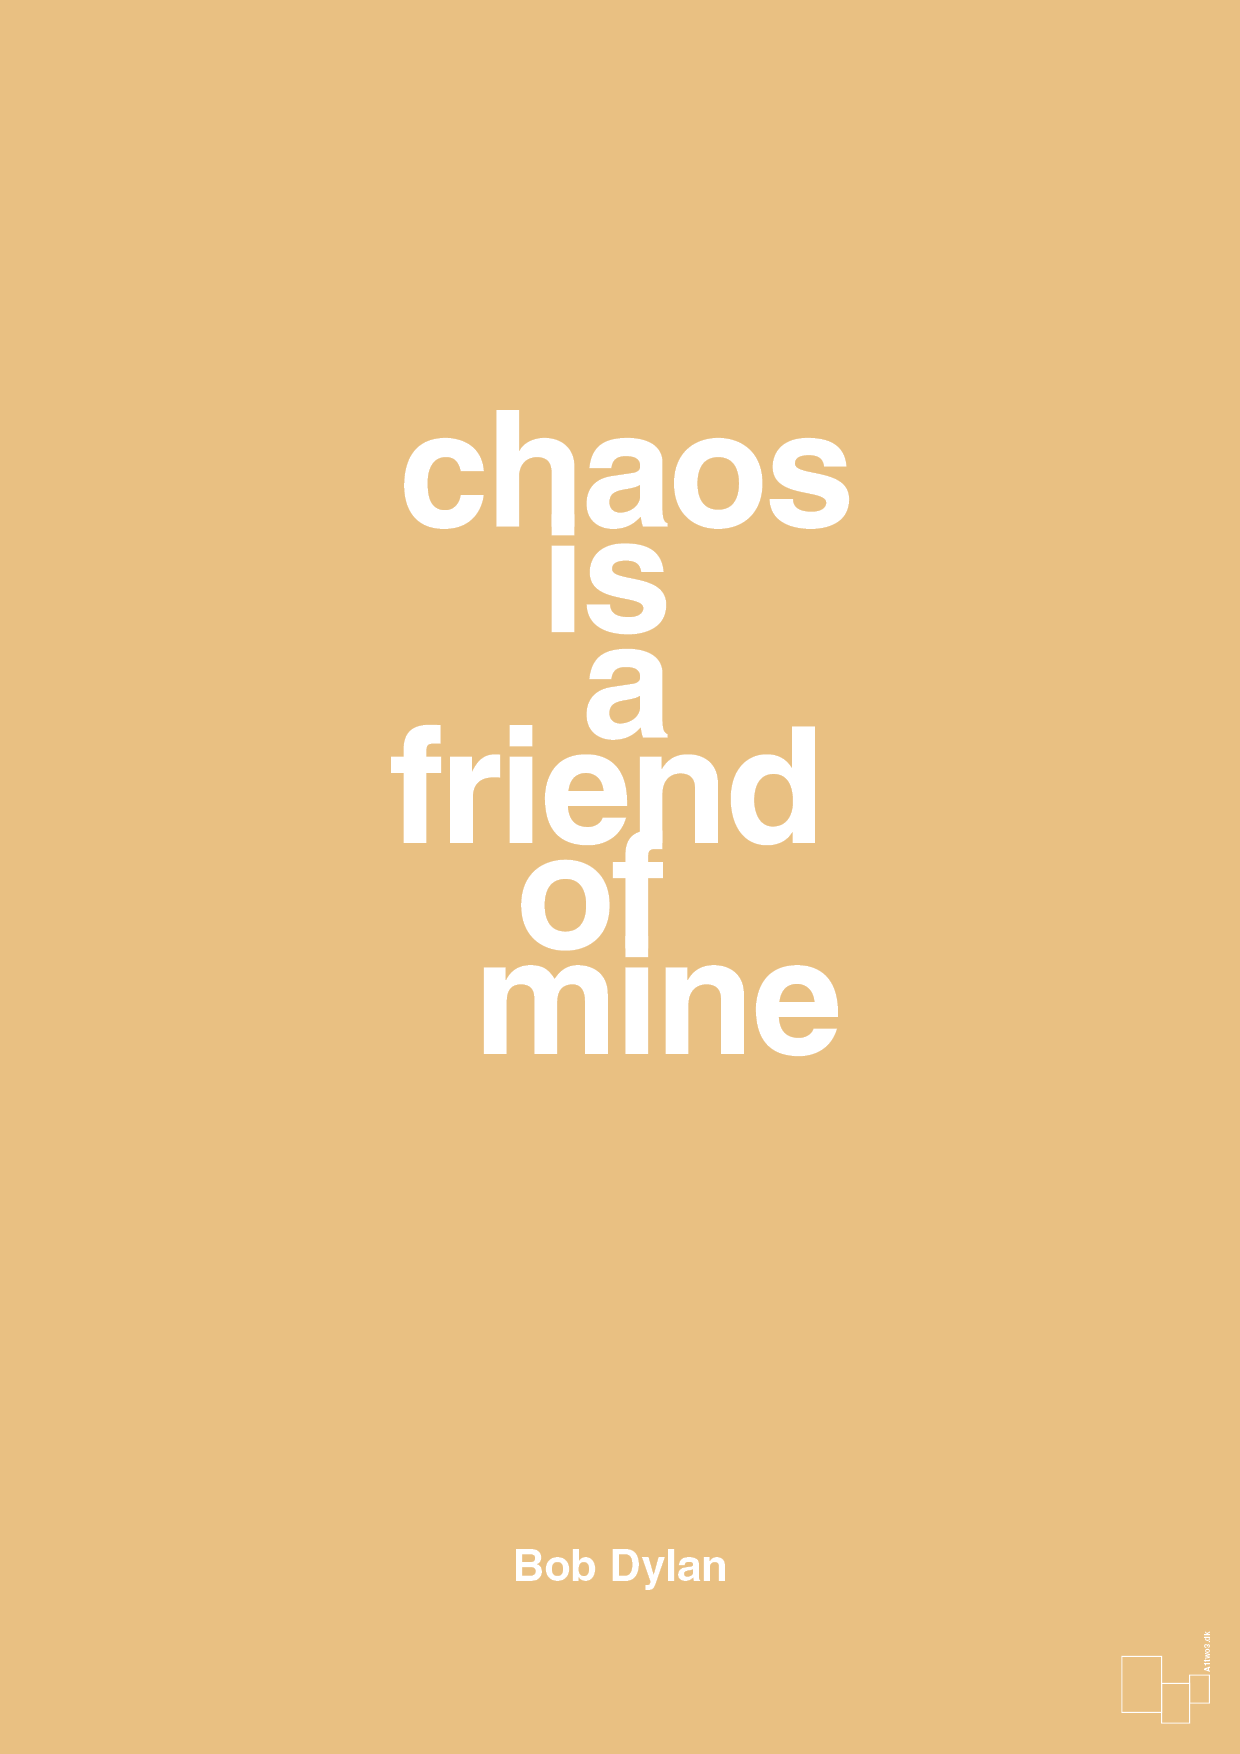 chaos is a friend of mine - Plakat med Citater i Charismatic